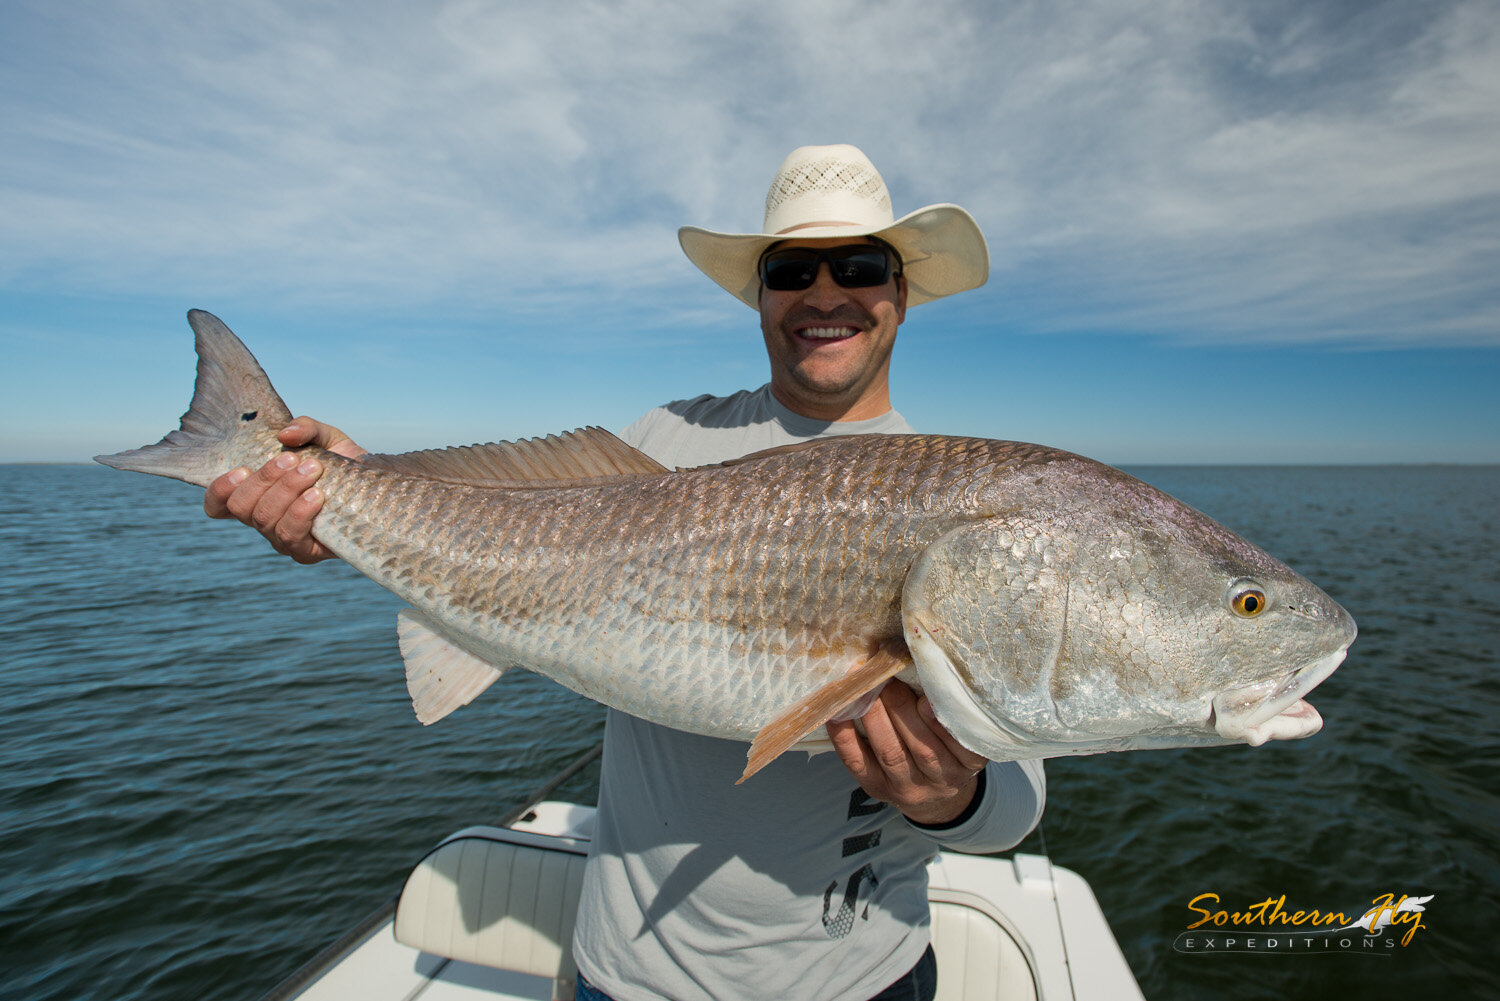 2019-11-25_SouthernFlyExpeditions_NewOrleans_TomHamiltonGroup-Rafe-3.jpg